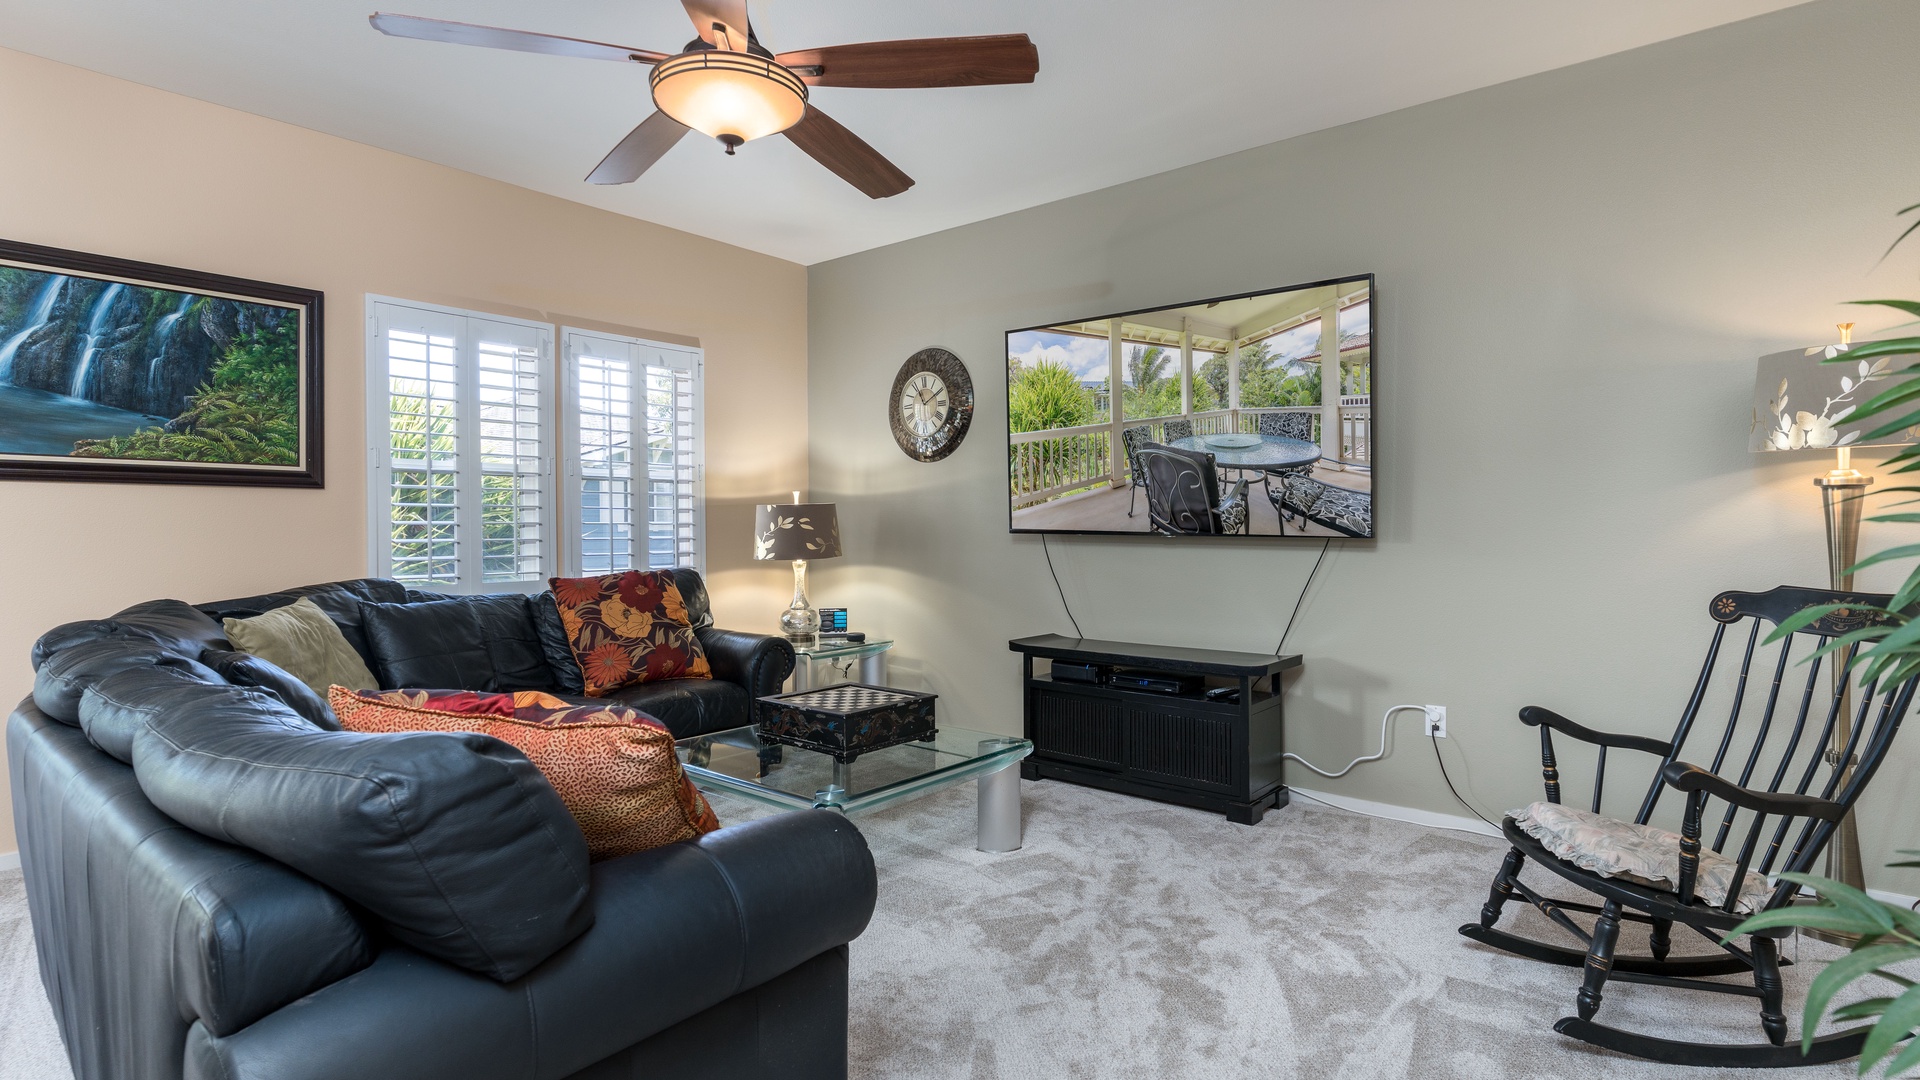 Kapolei Vacation Rentals, Coconut Plantation 1192-4 - Sink in to the plush seating with your favorite book or TV show in the living room.